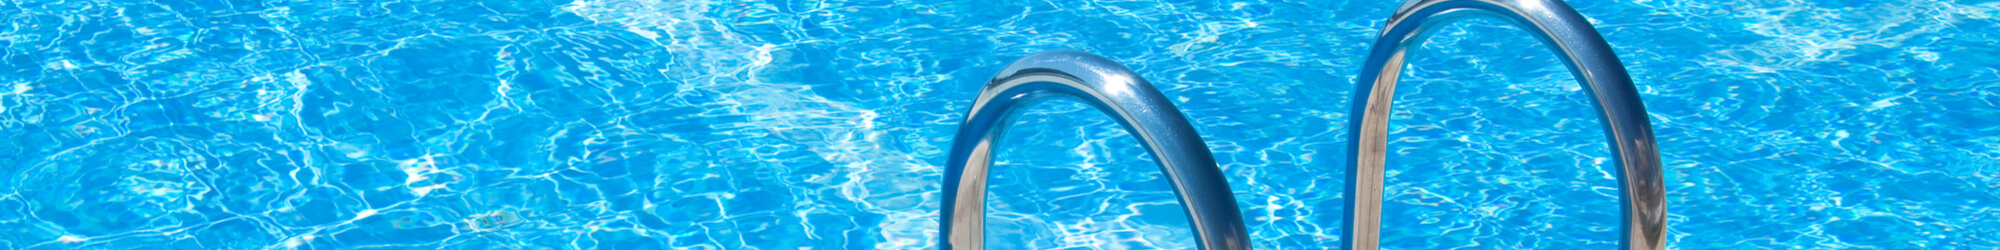 swimming pool accident attorneys in Pittsburgh